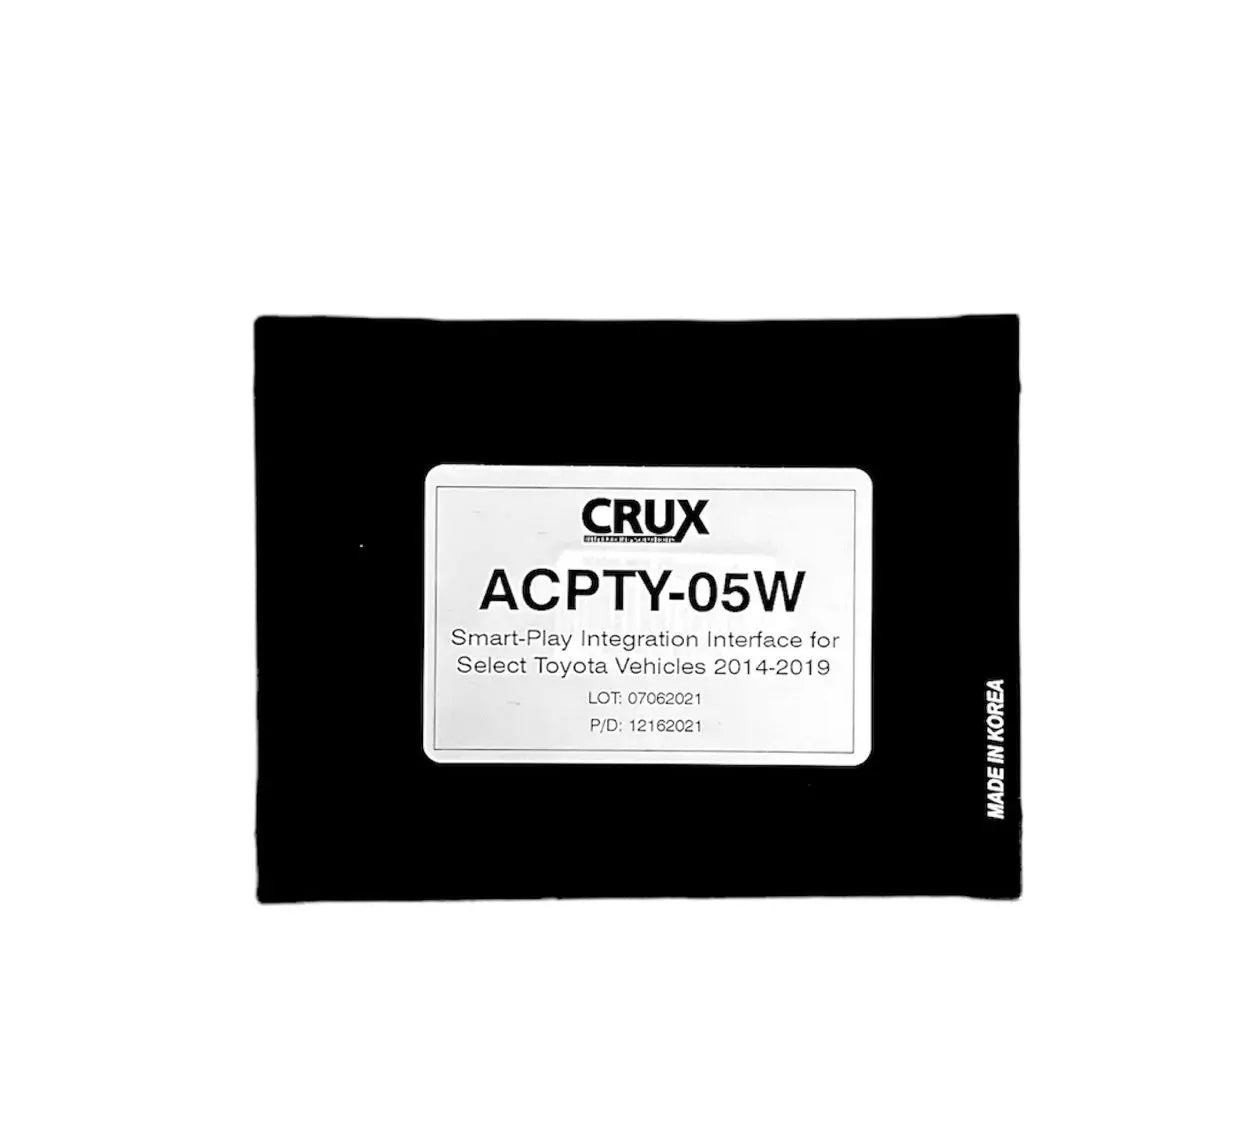 Crux ACPTY-05W Wireless Smart-Play Integration for Select for Select 2014-2019 Toyota Vehicles